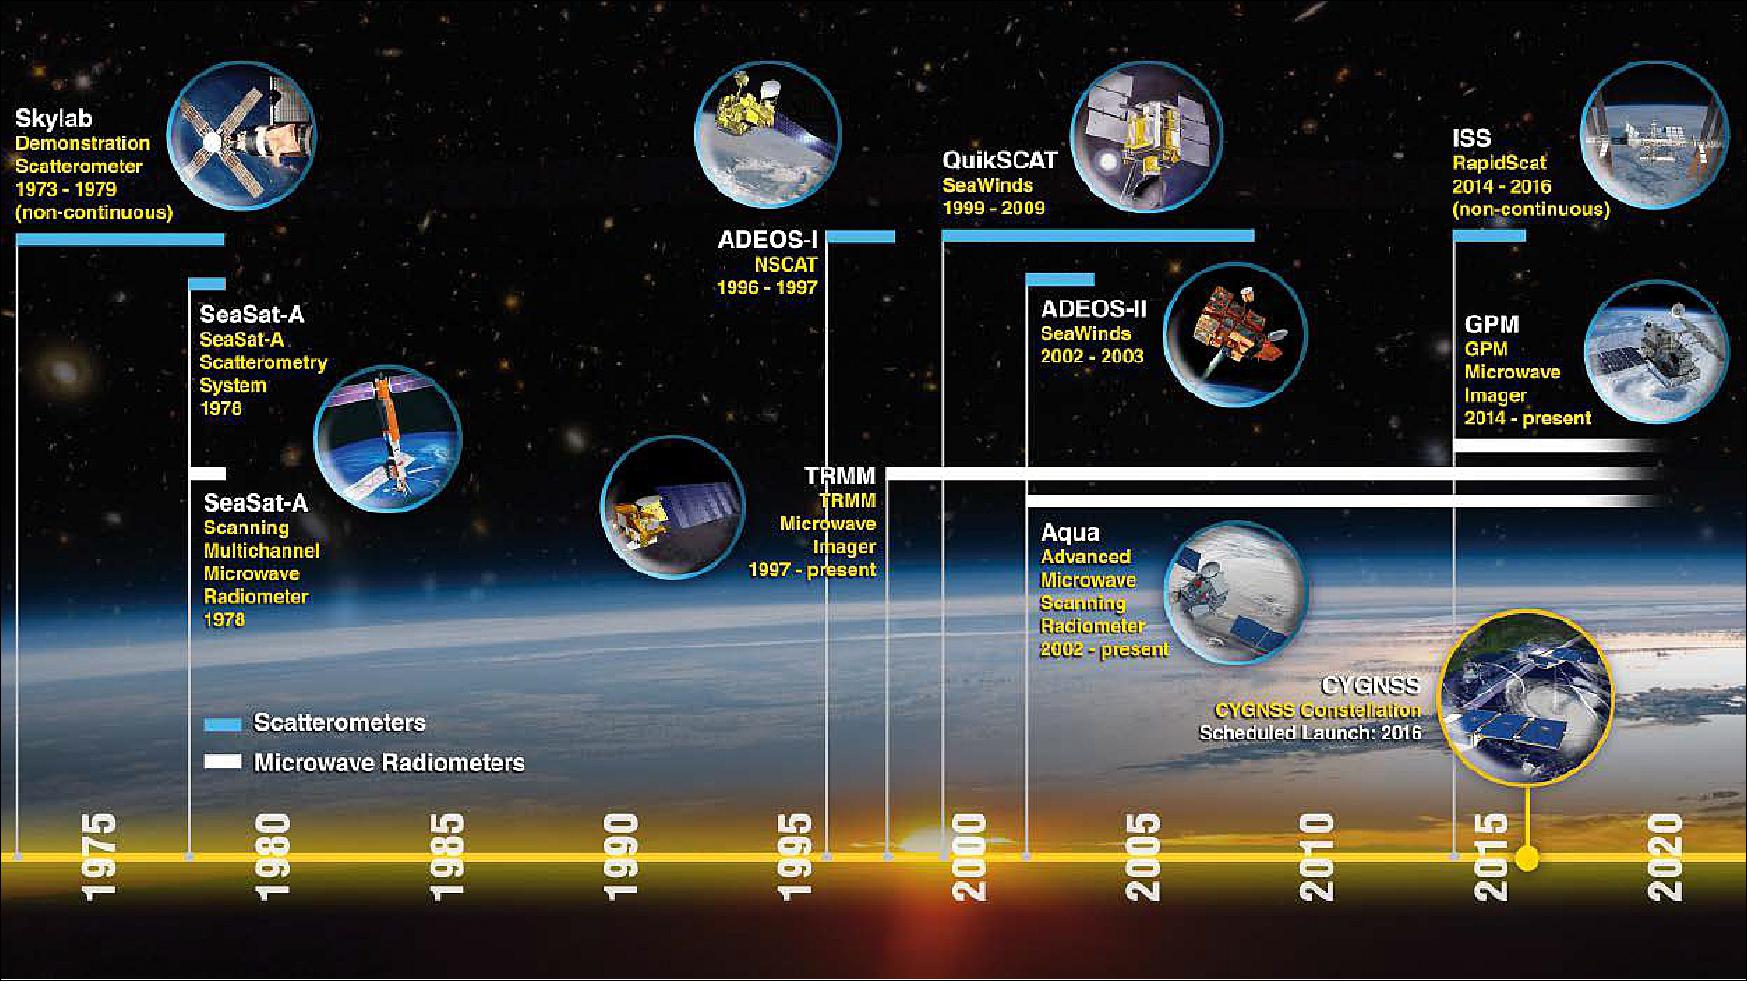 Figure 1: Timeline of NASA scatterometry and microwave radiometry missions (image credit: NASA)